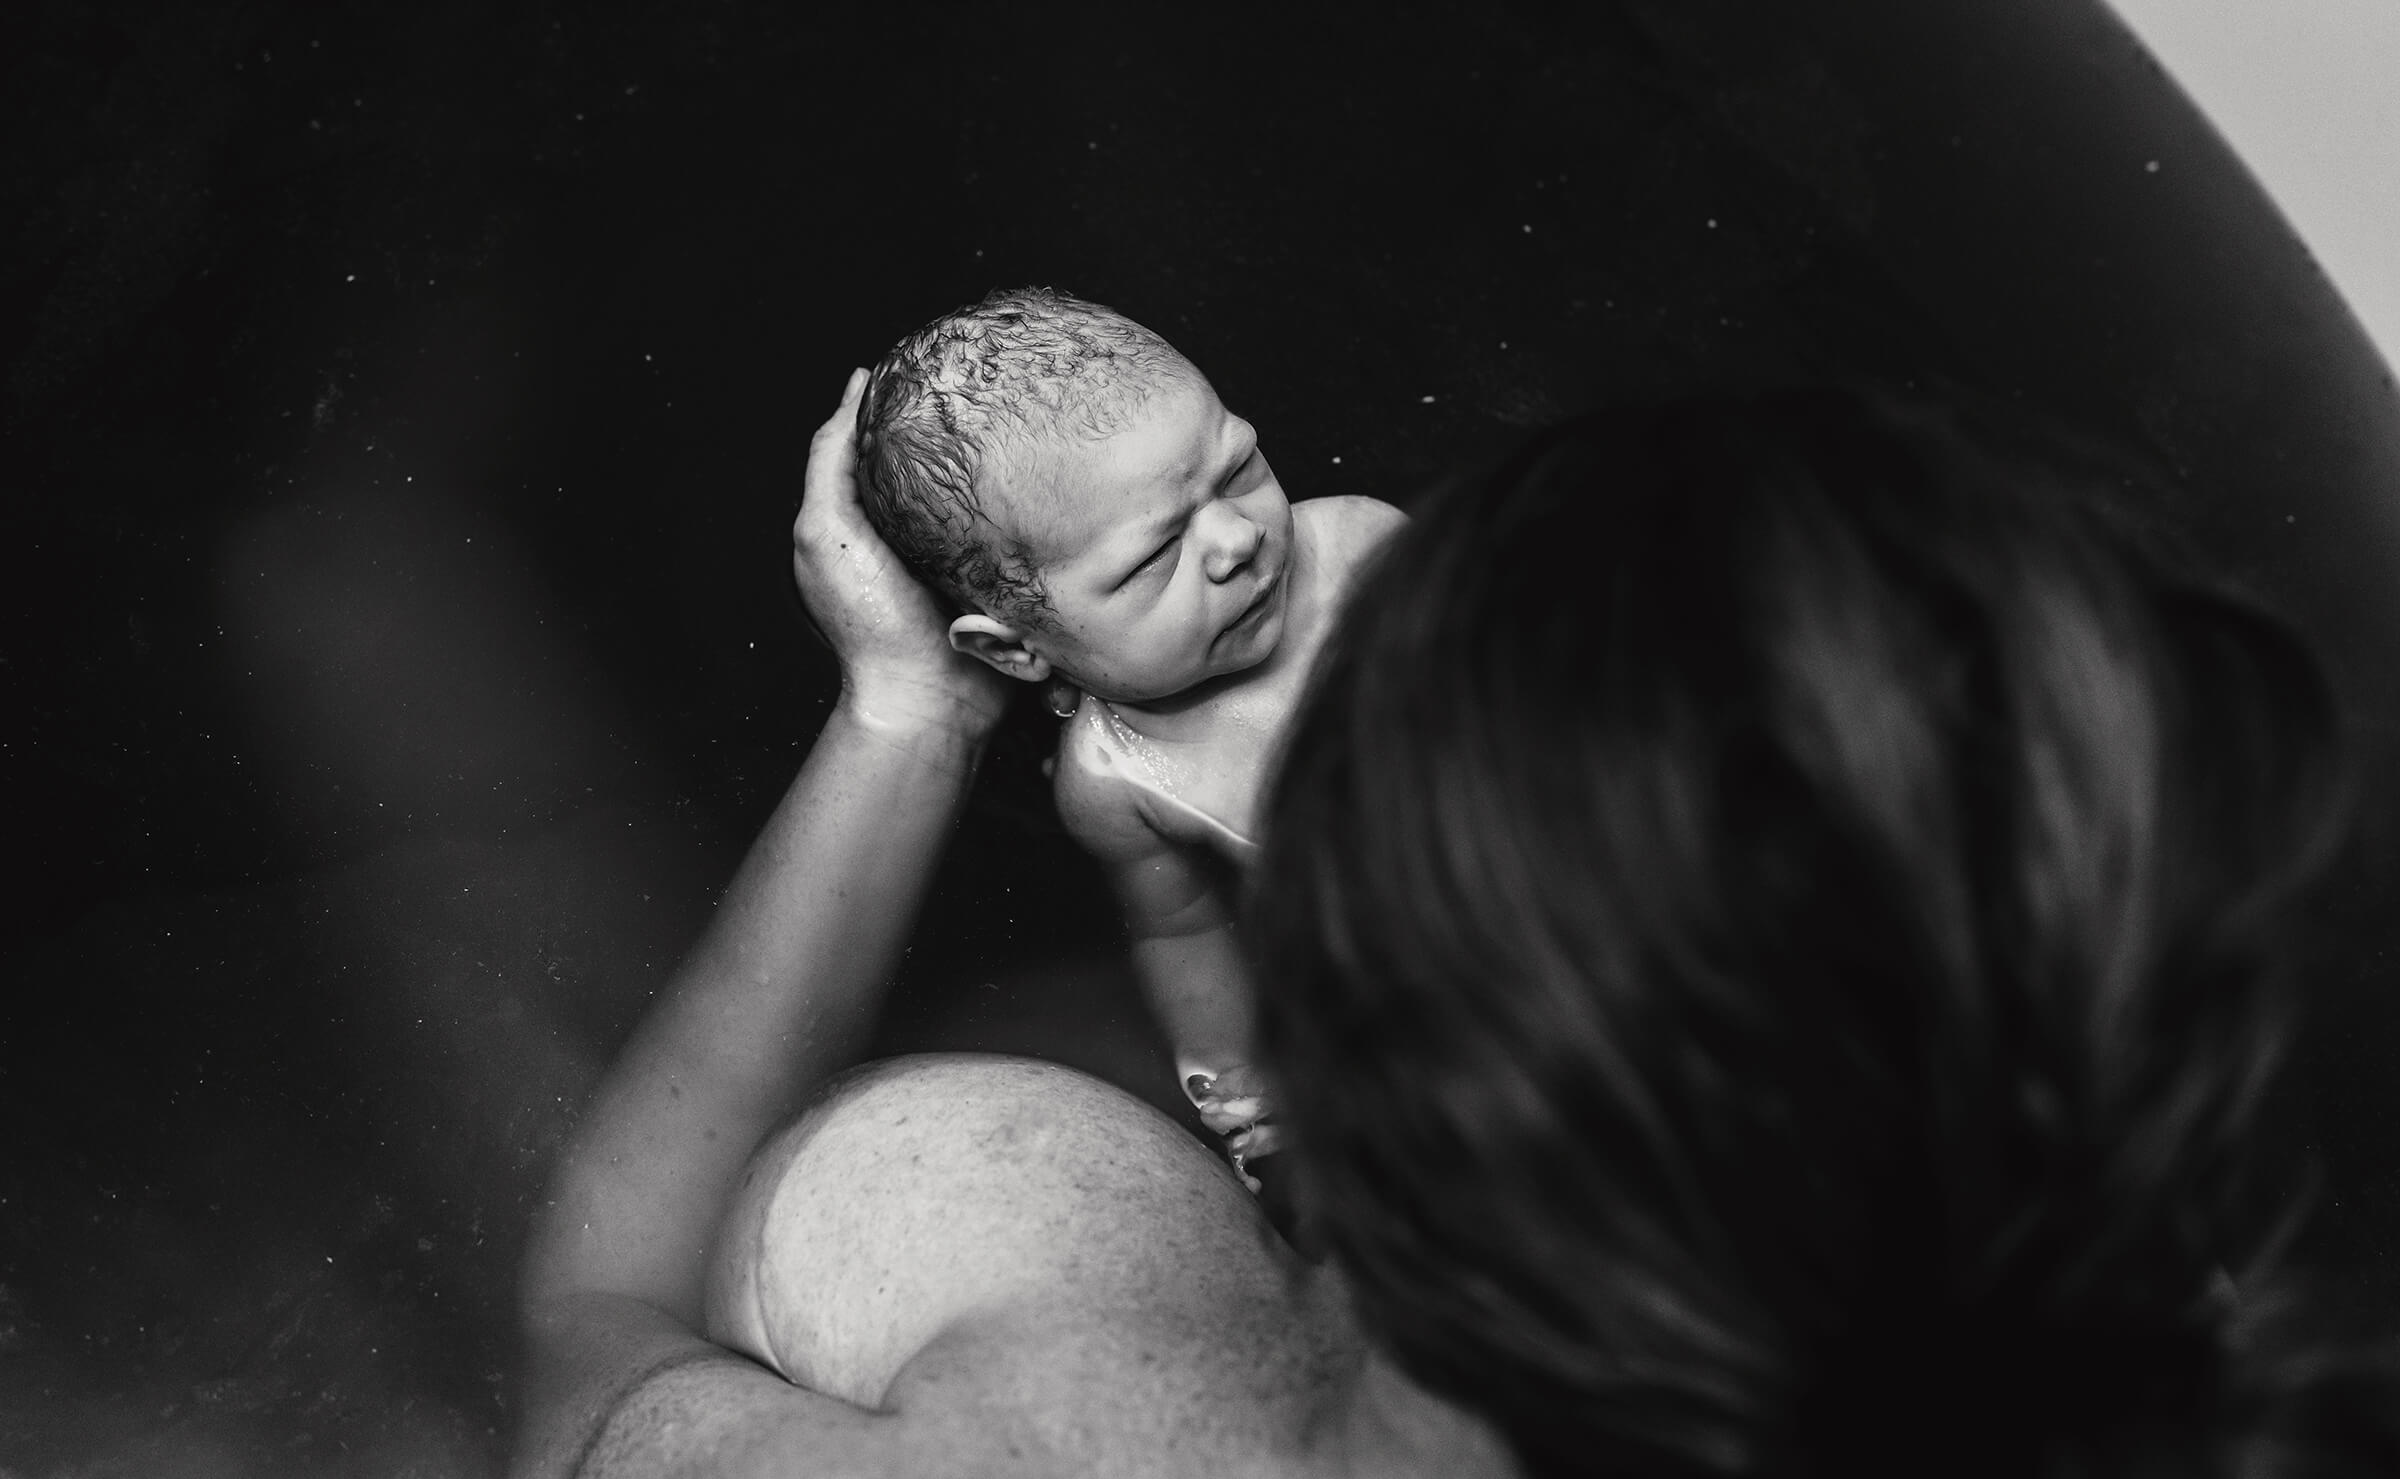 black and white image of a baby right after delivery in a birth tub. 